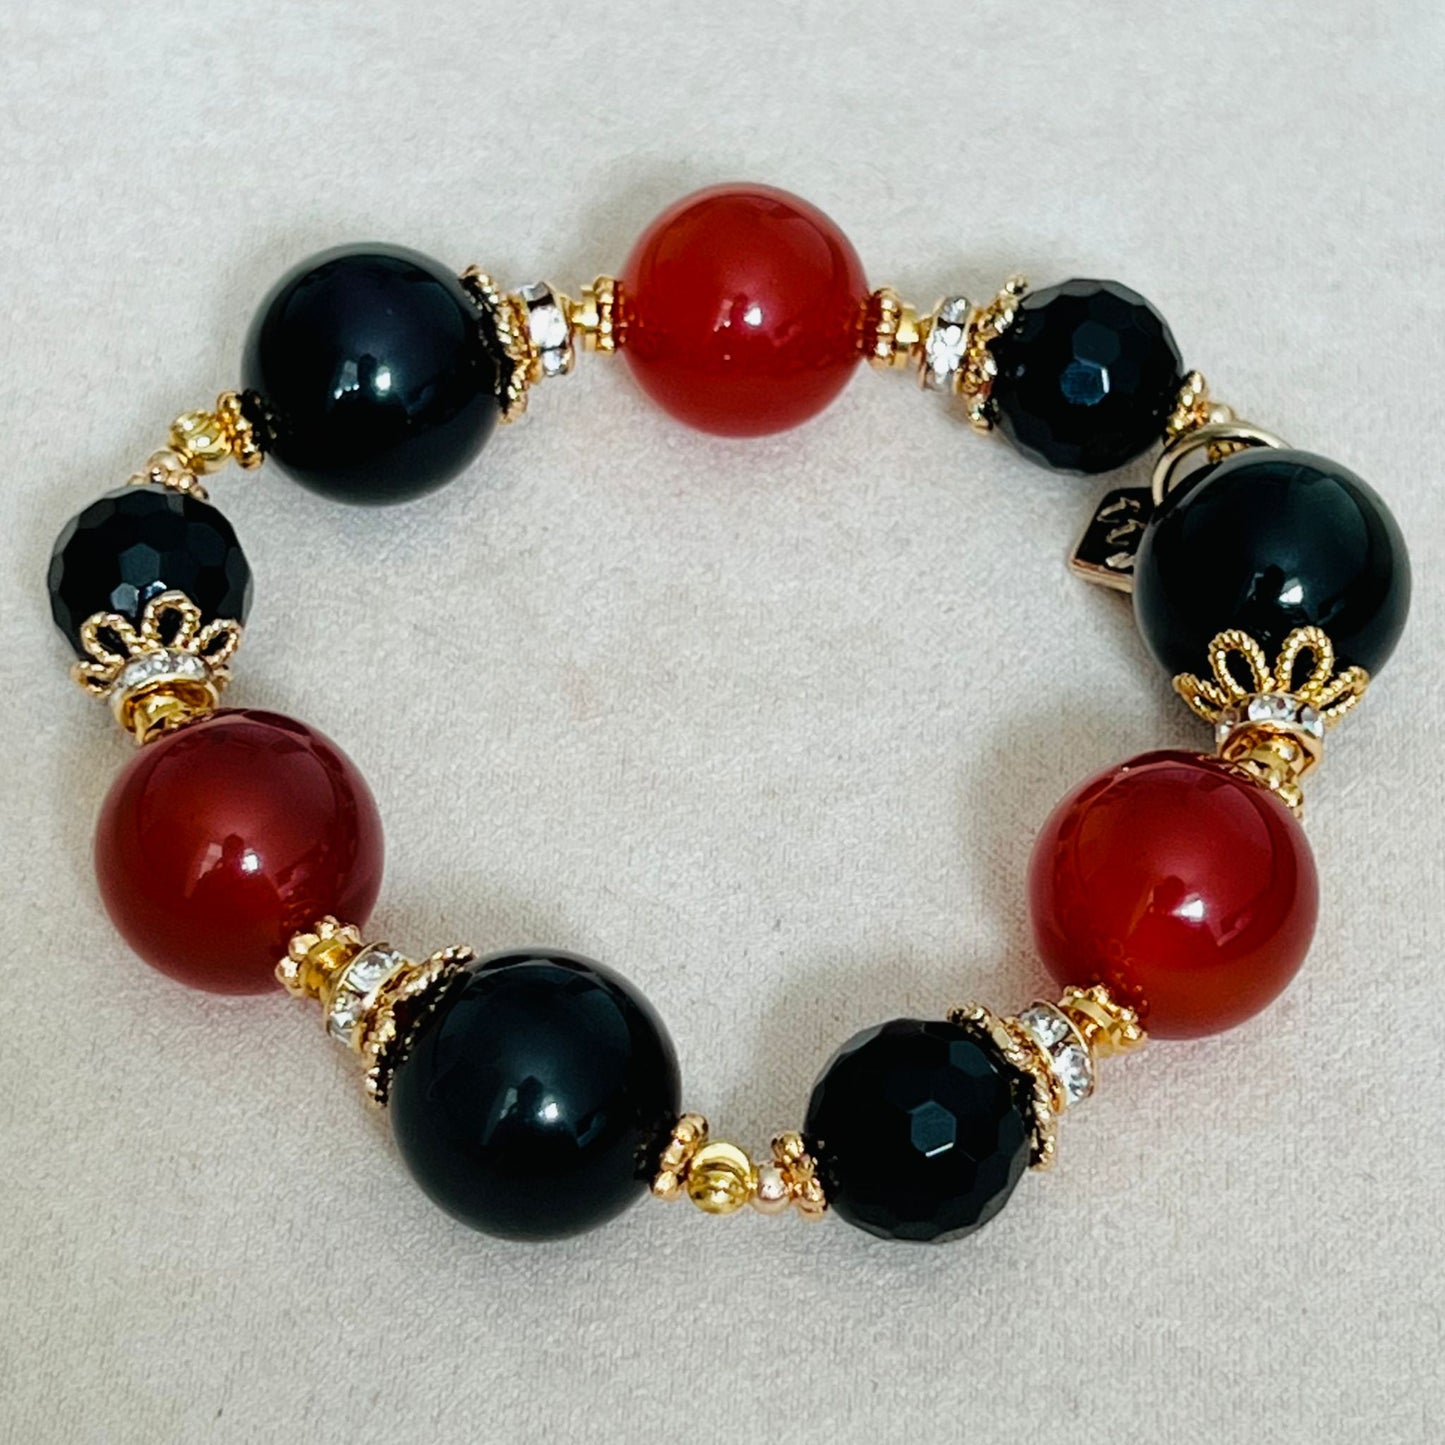 Protective Red Agate Bracelet